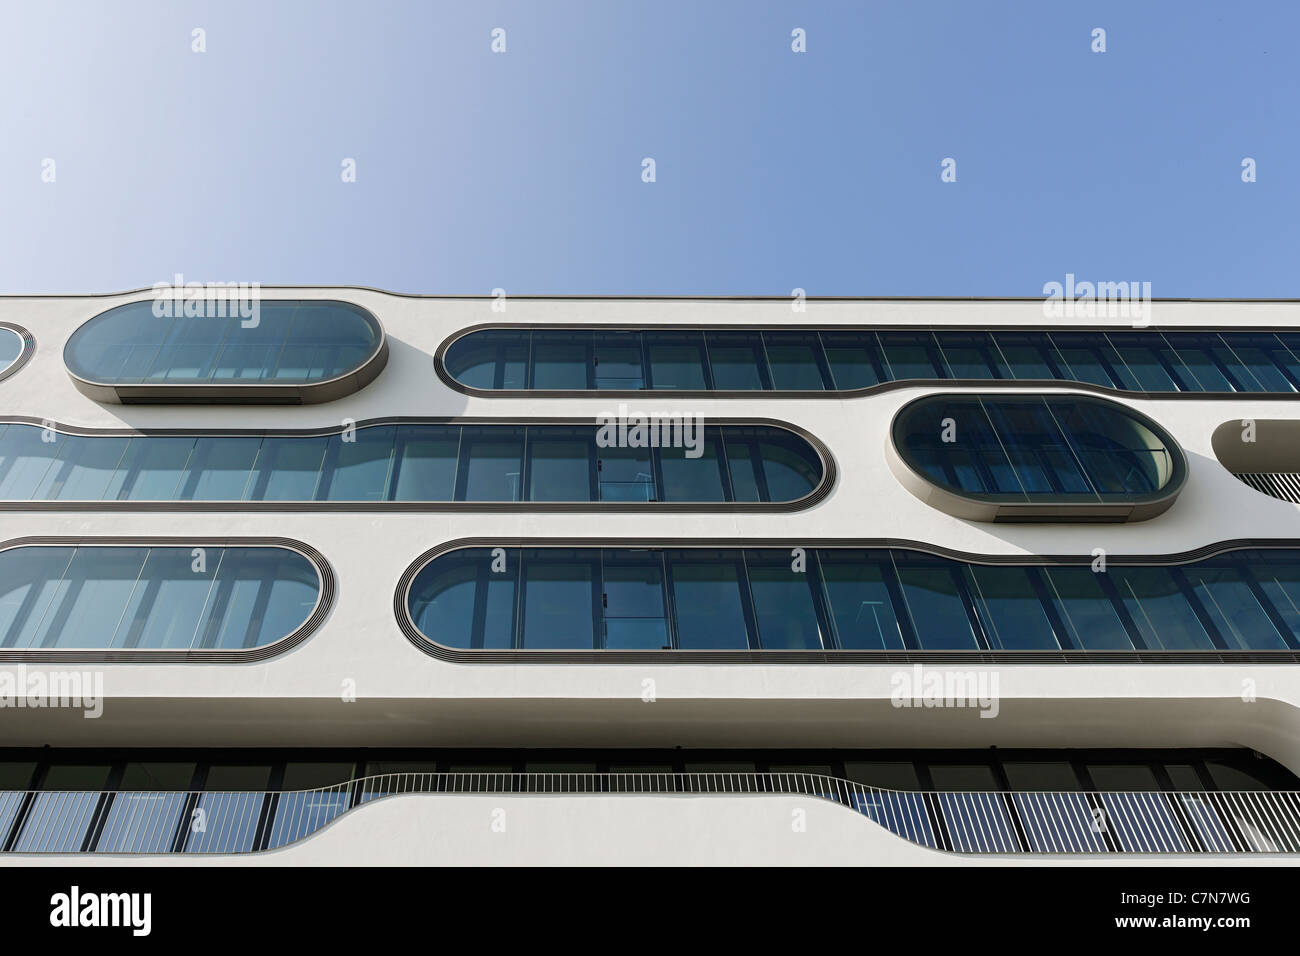 Front, facade, office building, modern architecture, creative, design, An der Alster 1, Hanseatic City of Hamburg, Germany Stock Photo